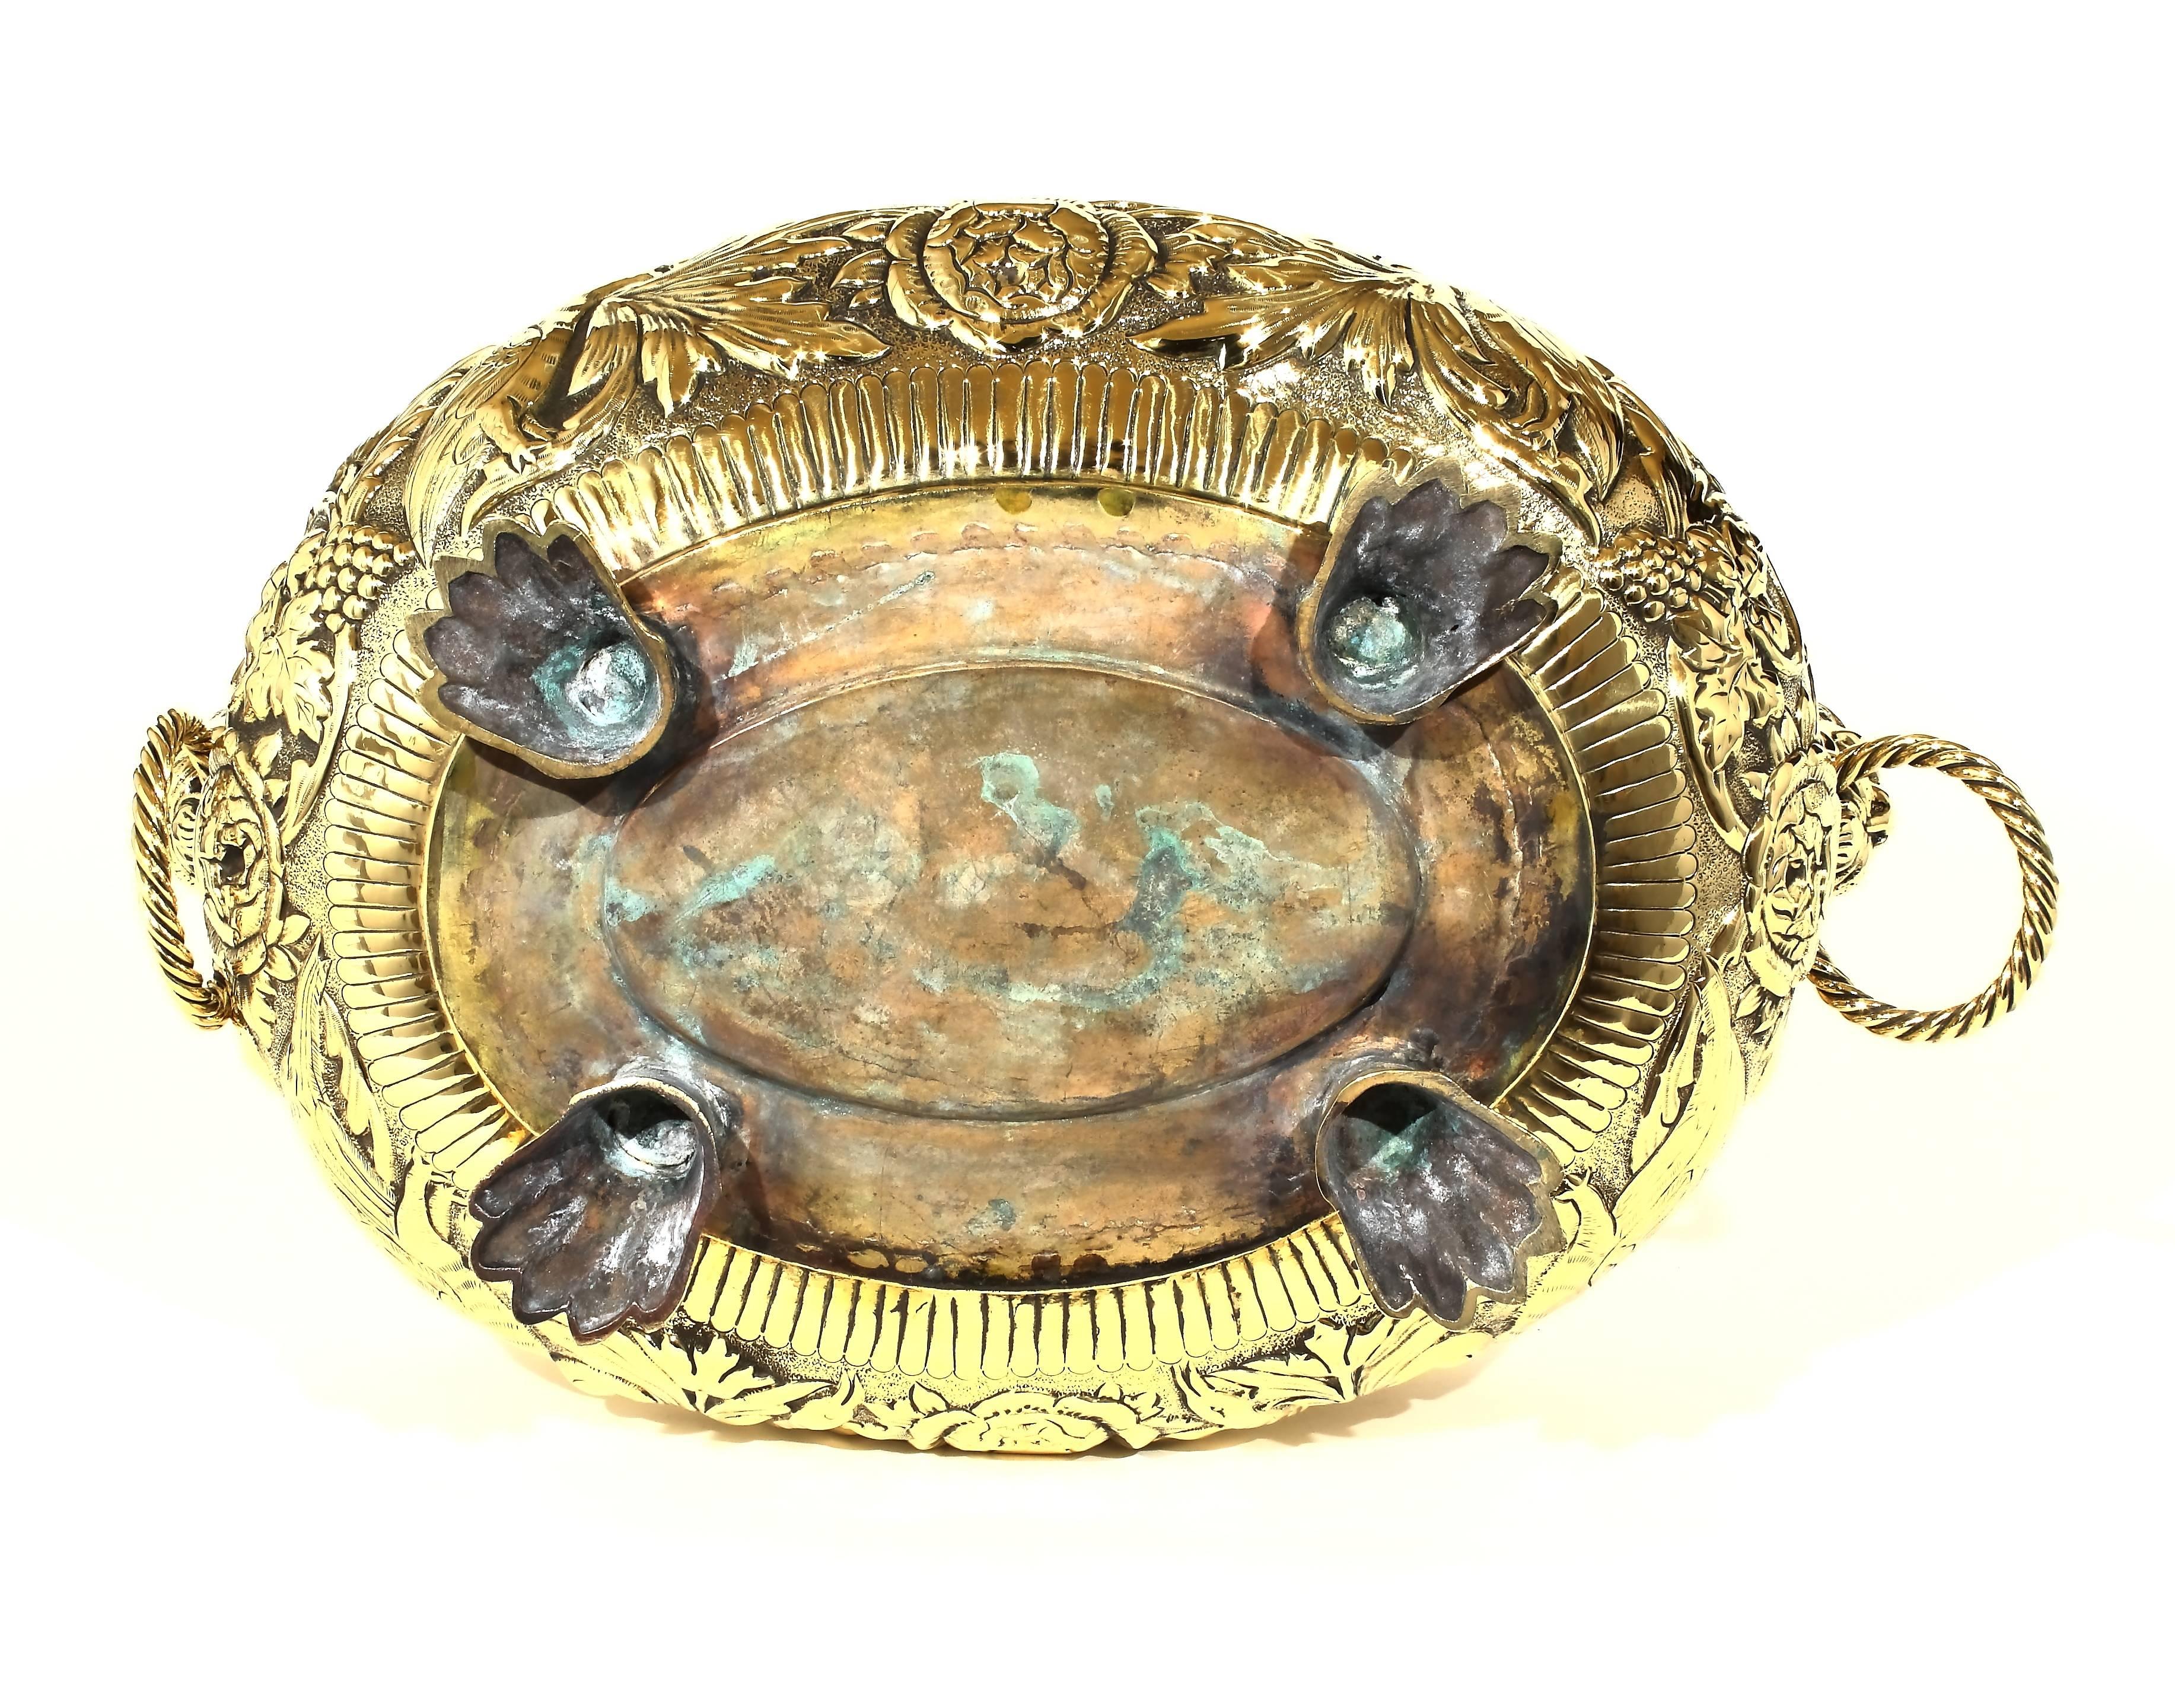 French, oval brass planter with cast lion’s head handles and cast feet. Heavy quality. Slightly different pattern to both sides.

Top rim 17” x 12.75”. Overall height 8.50”.

France, circa 1860.